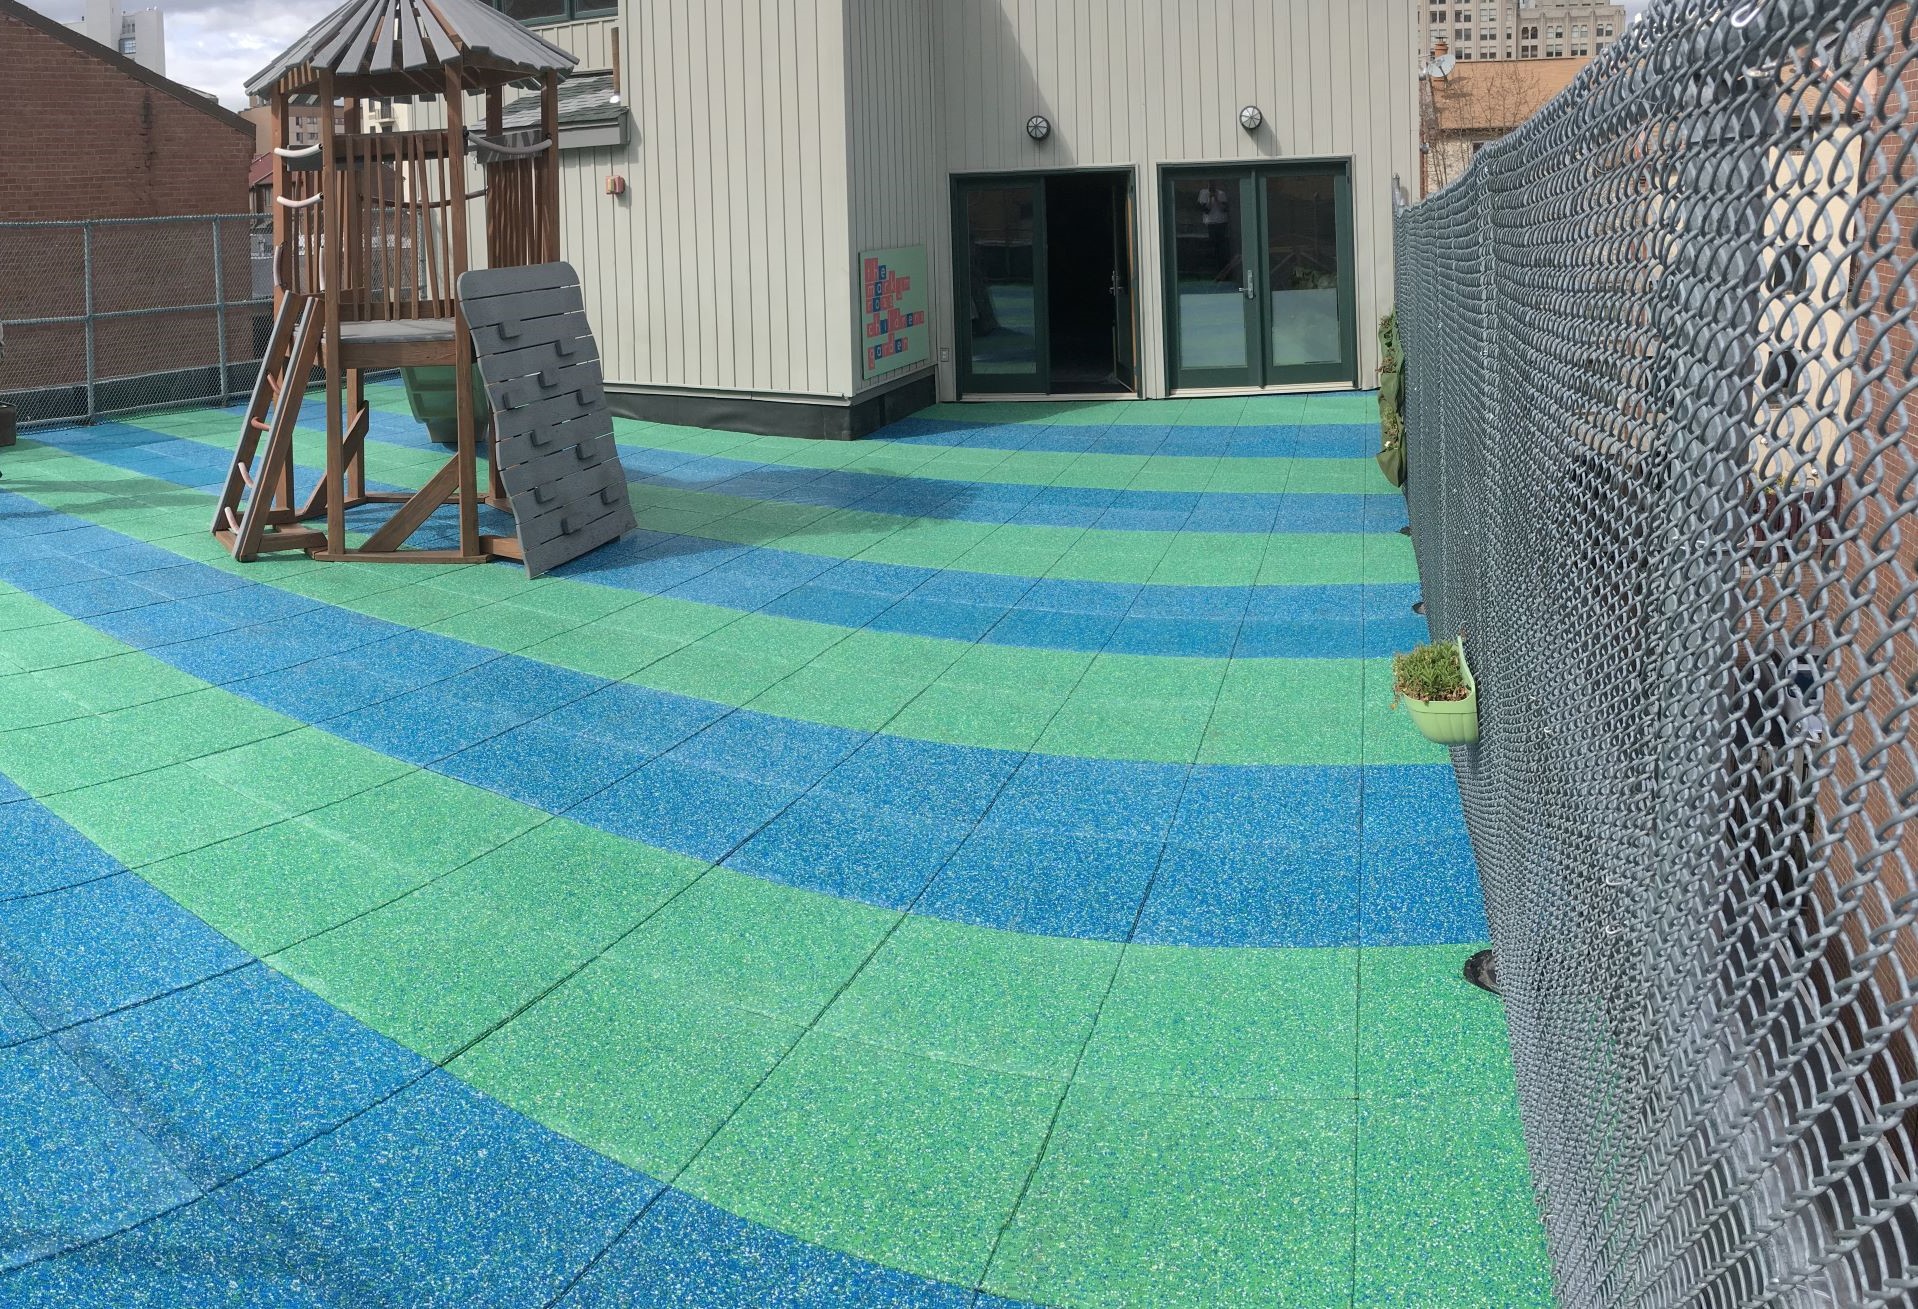 UNITY'S Rooftop Playground Pavers Using Solid TPV Top Color Chips